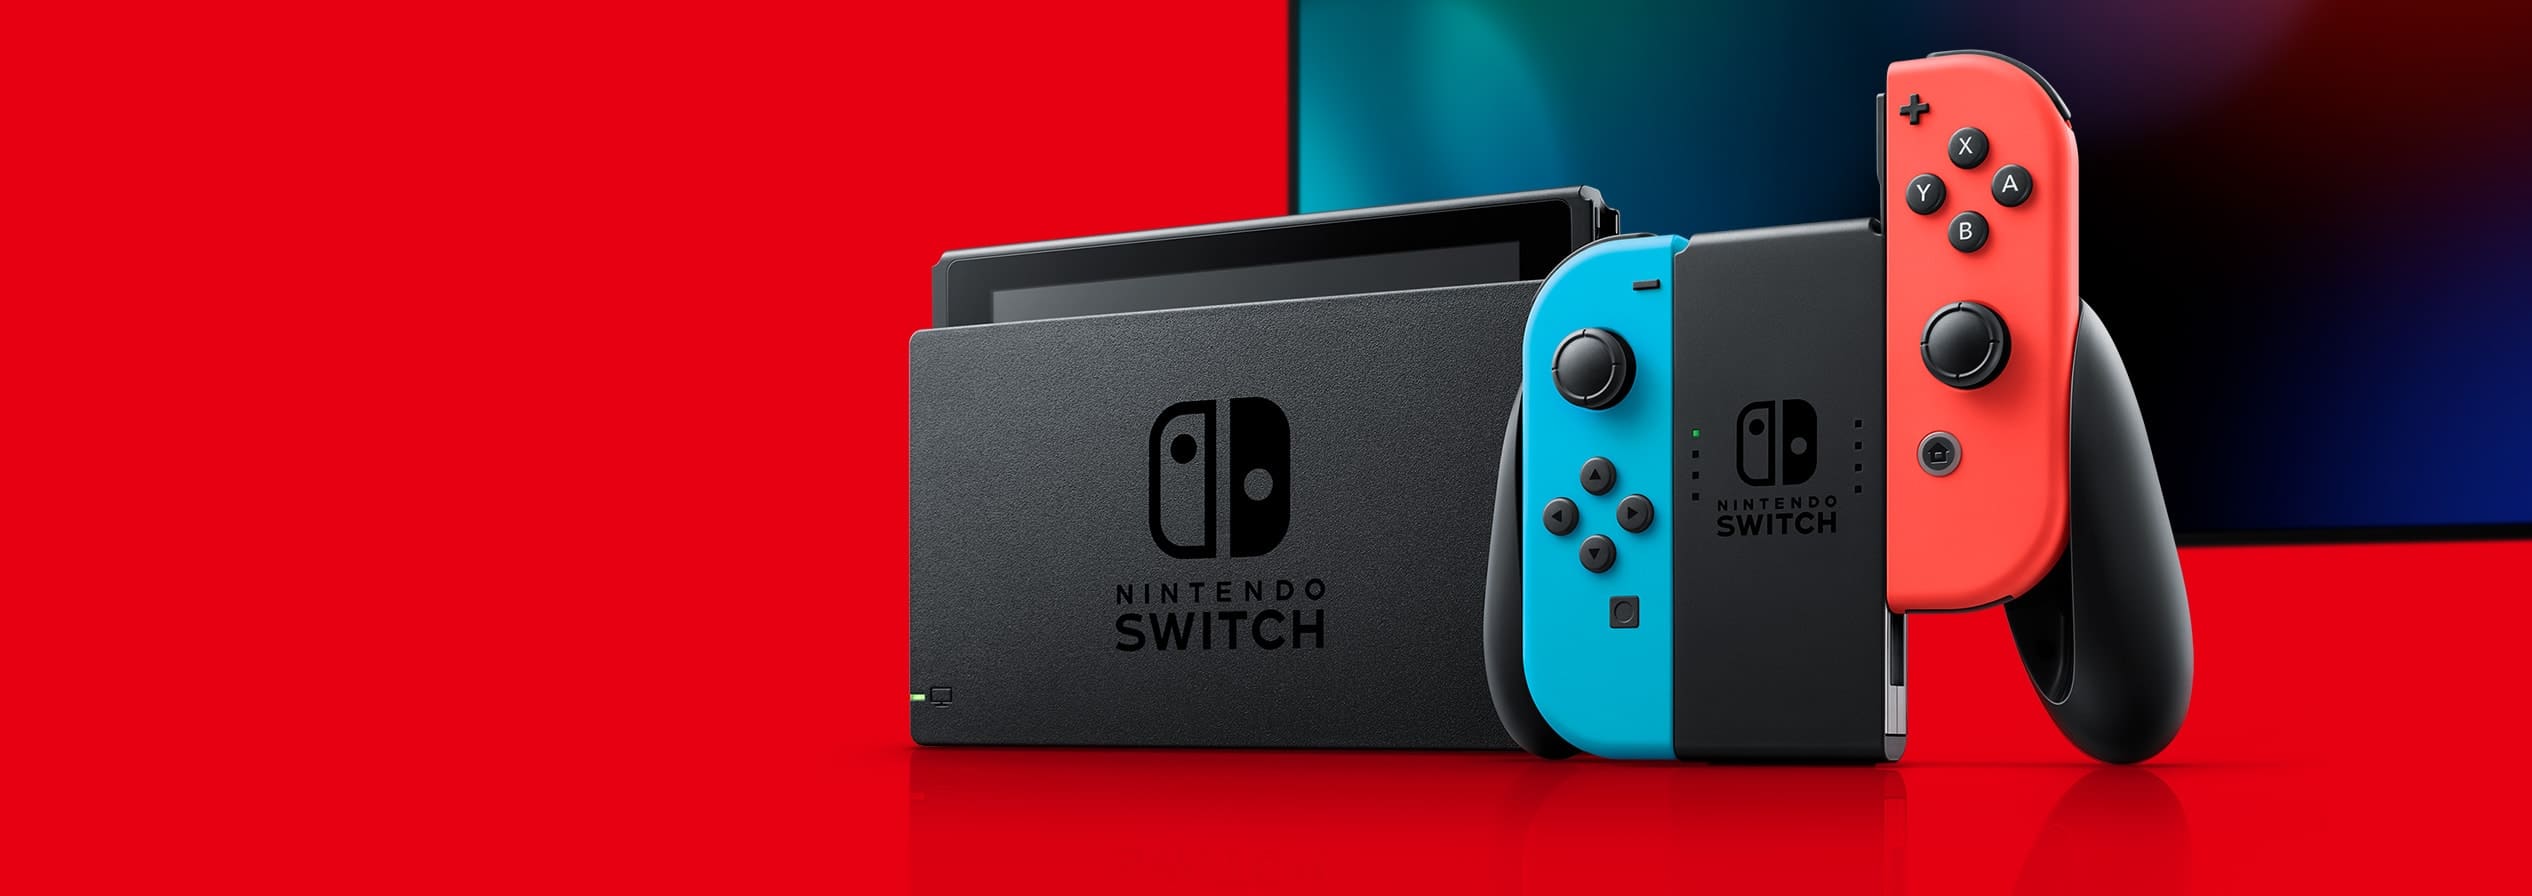 Nintendo Switch Was The Best Selling Console During July